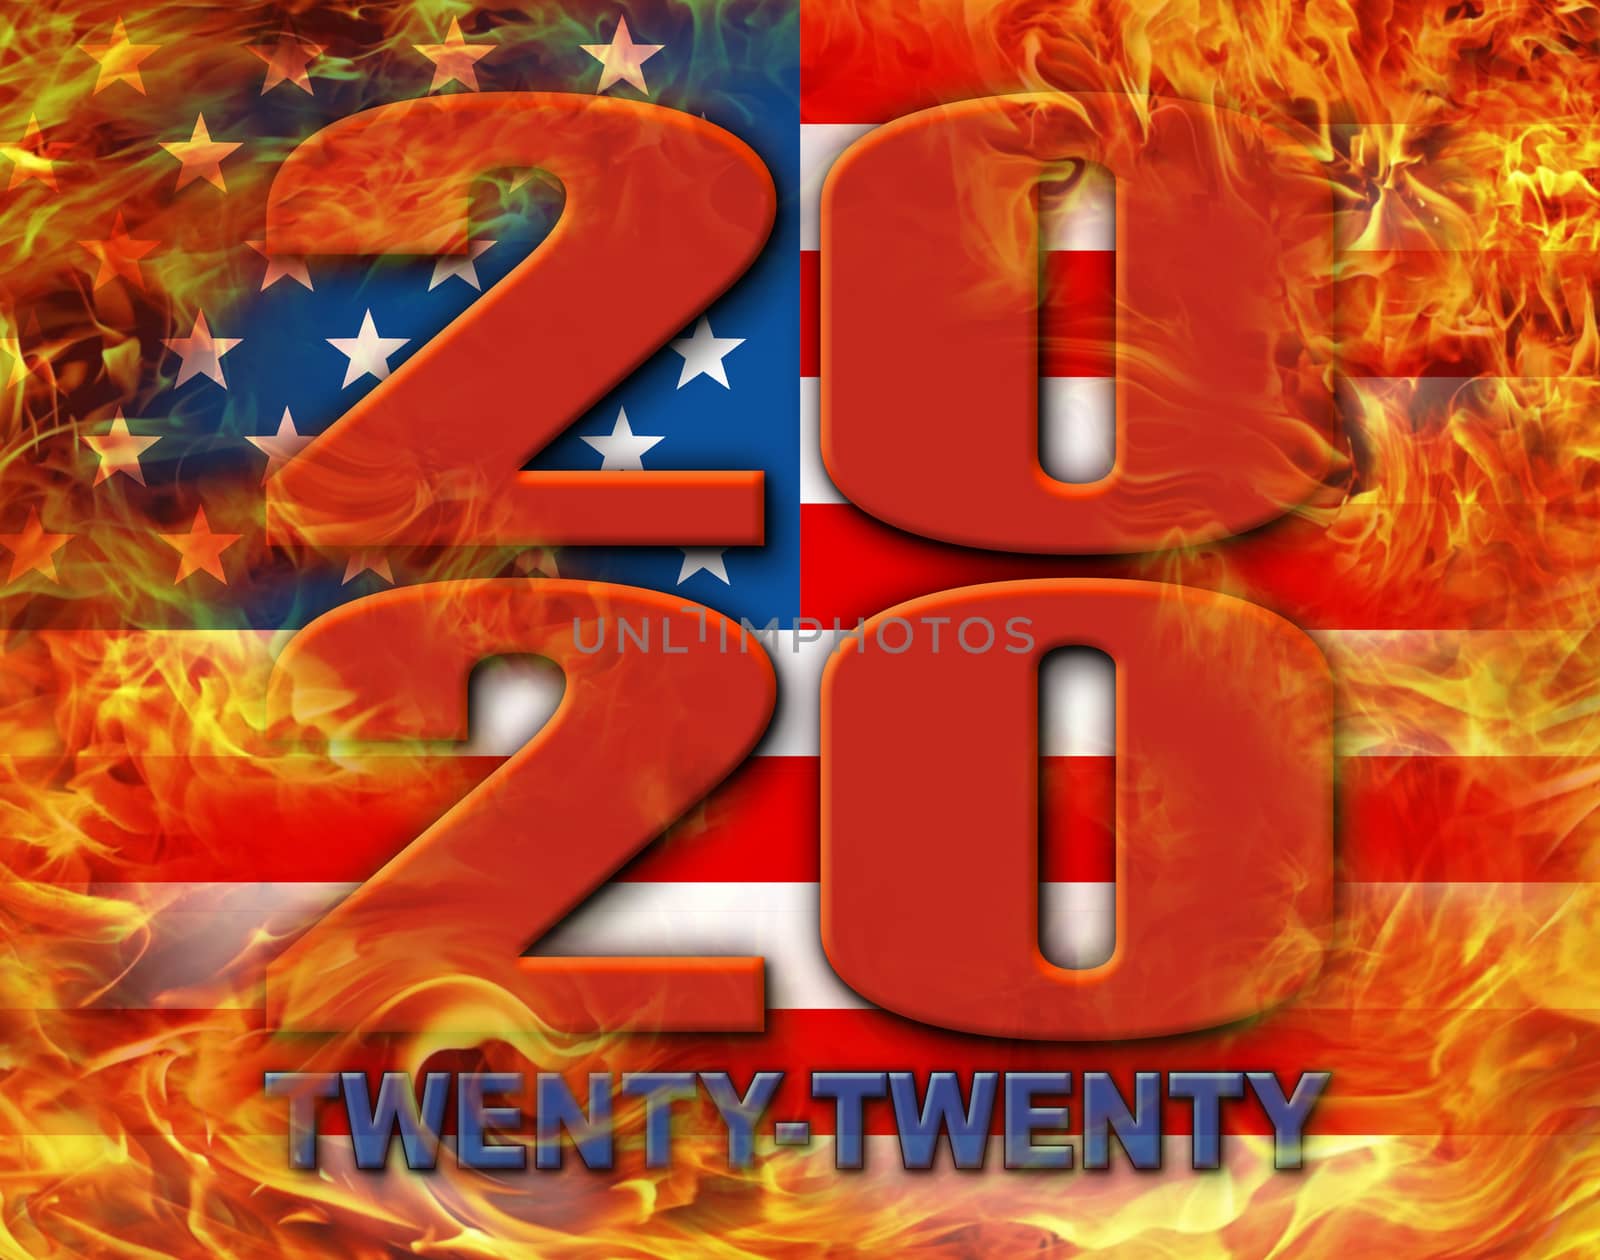 The year 2020 in flames, both in number and spelled out; designed using the United States Flag Stars and Stripes. 3D Illustration